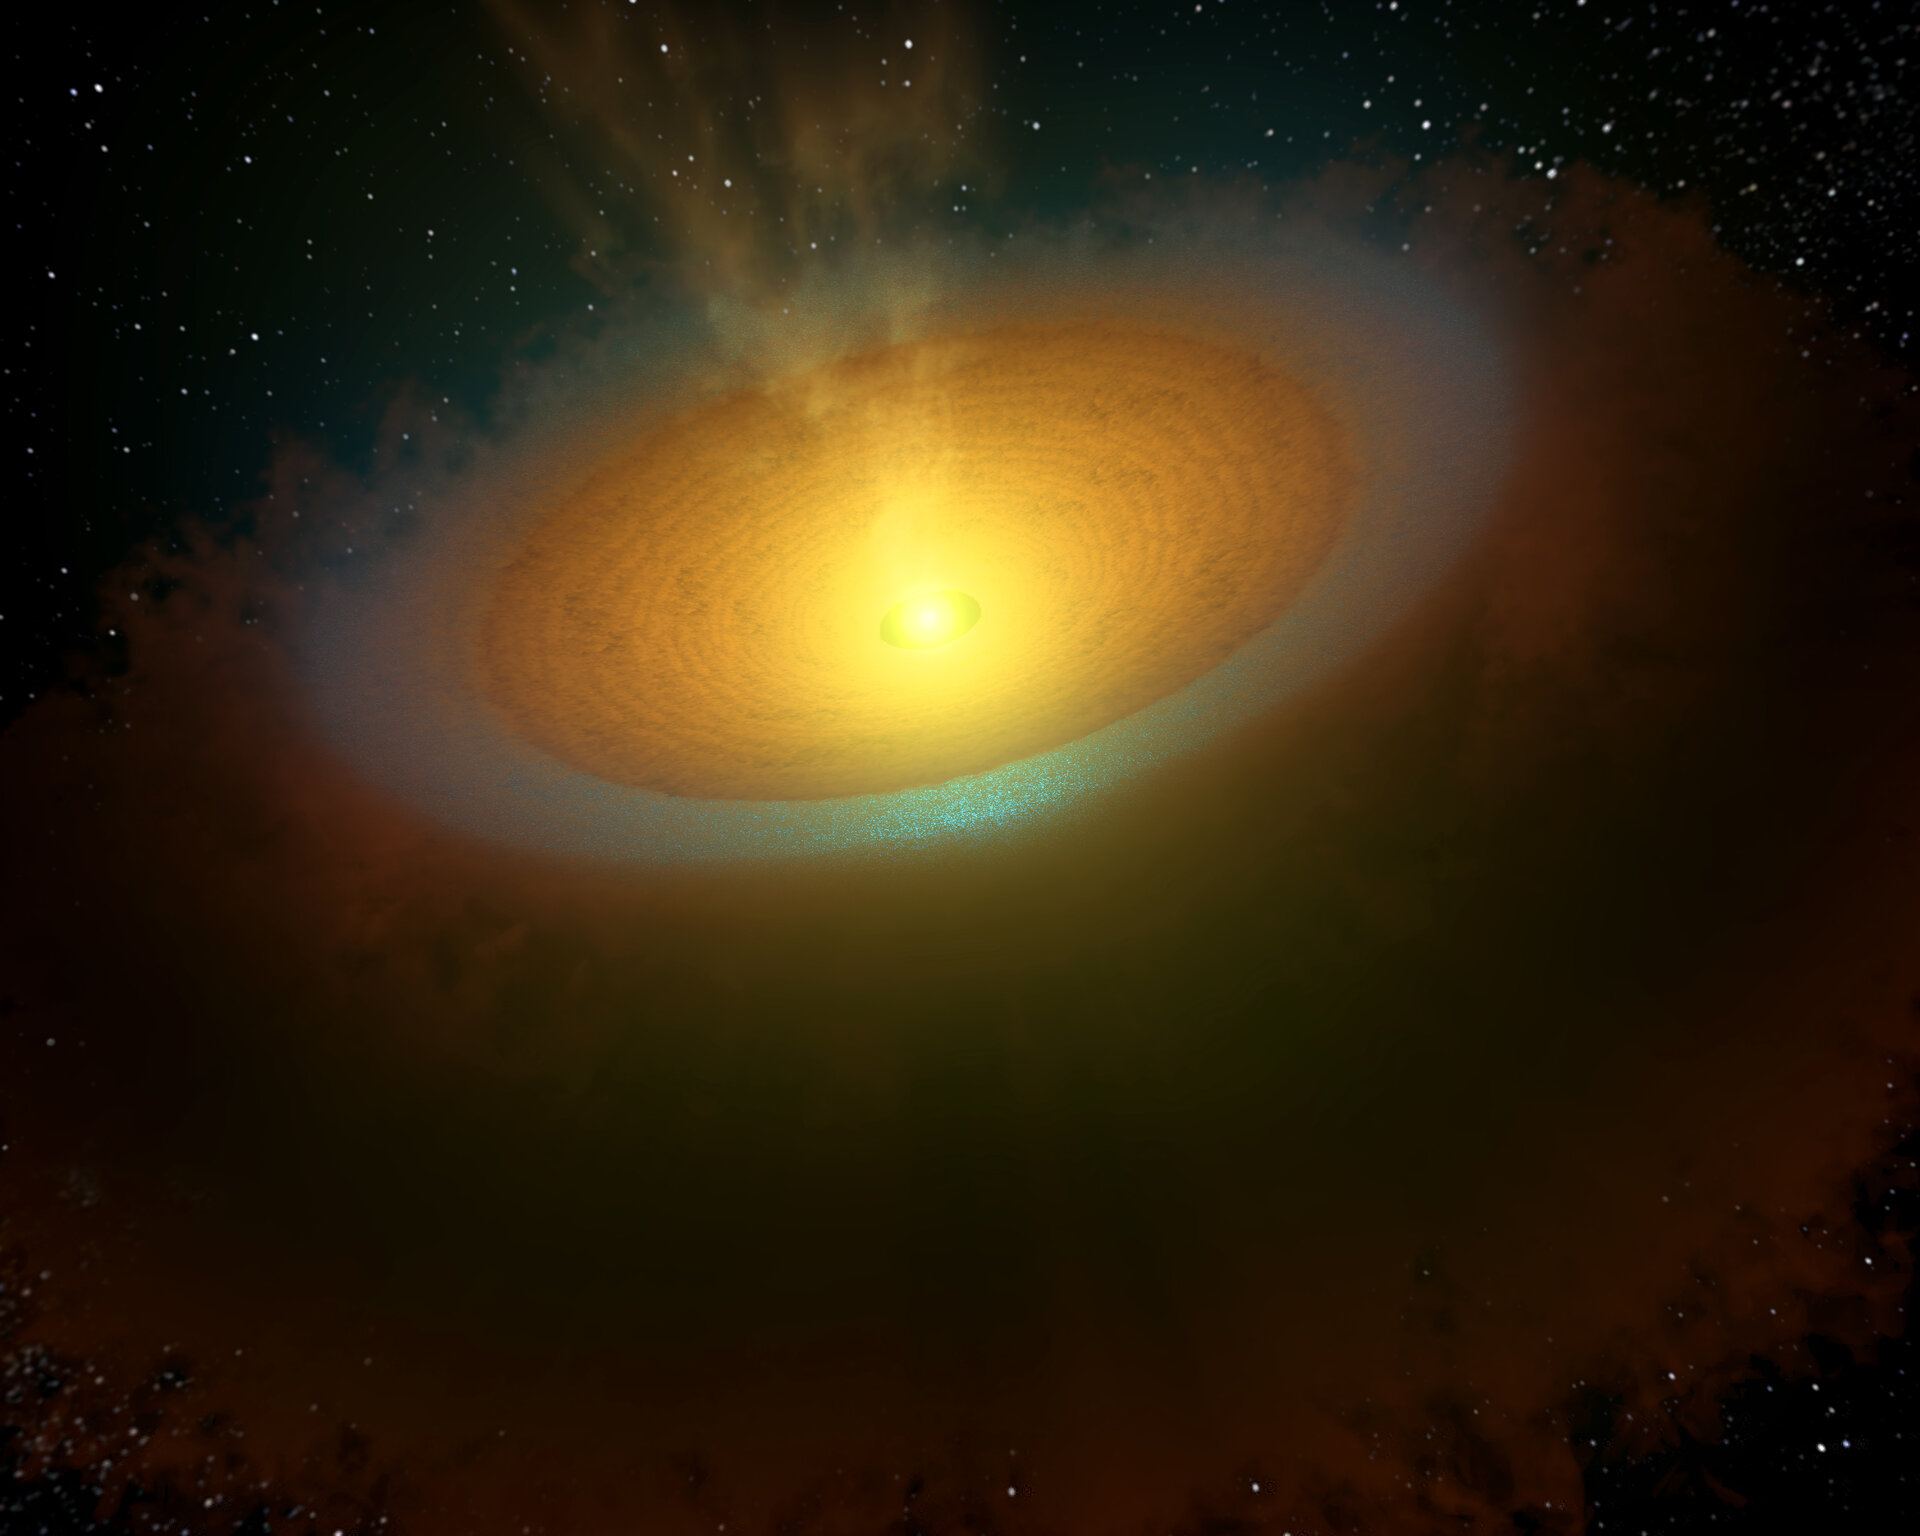 Artist's impression of the TW Hydrae protoplanetary disc